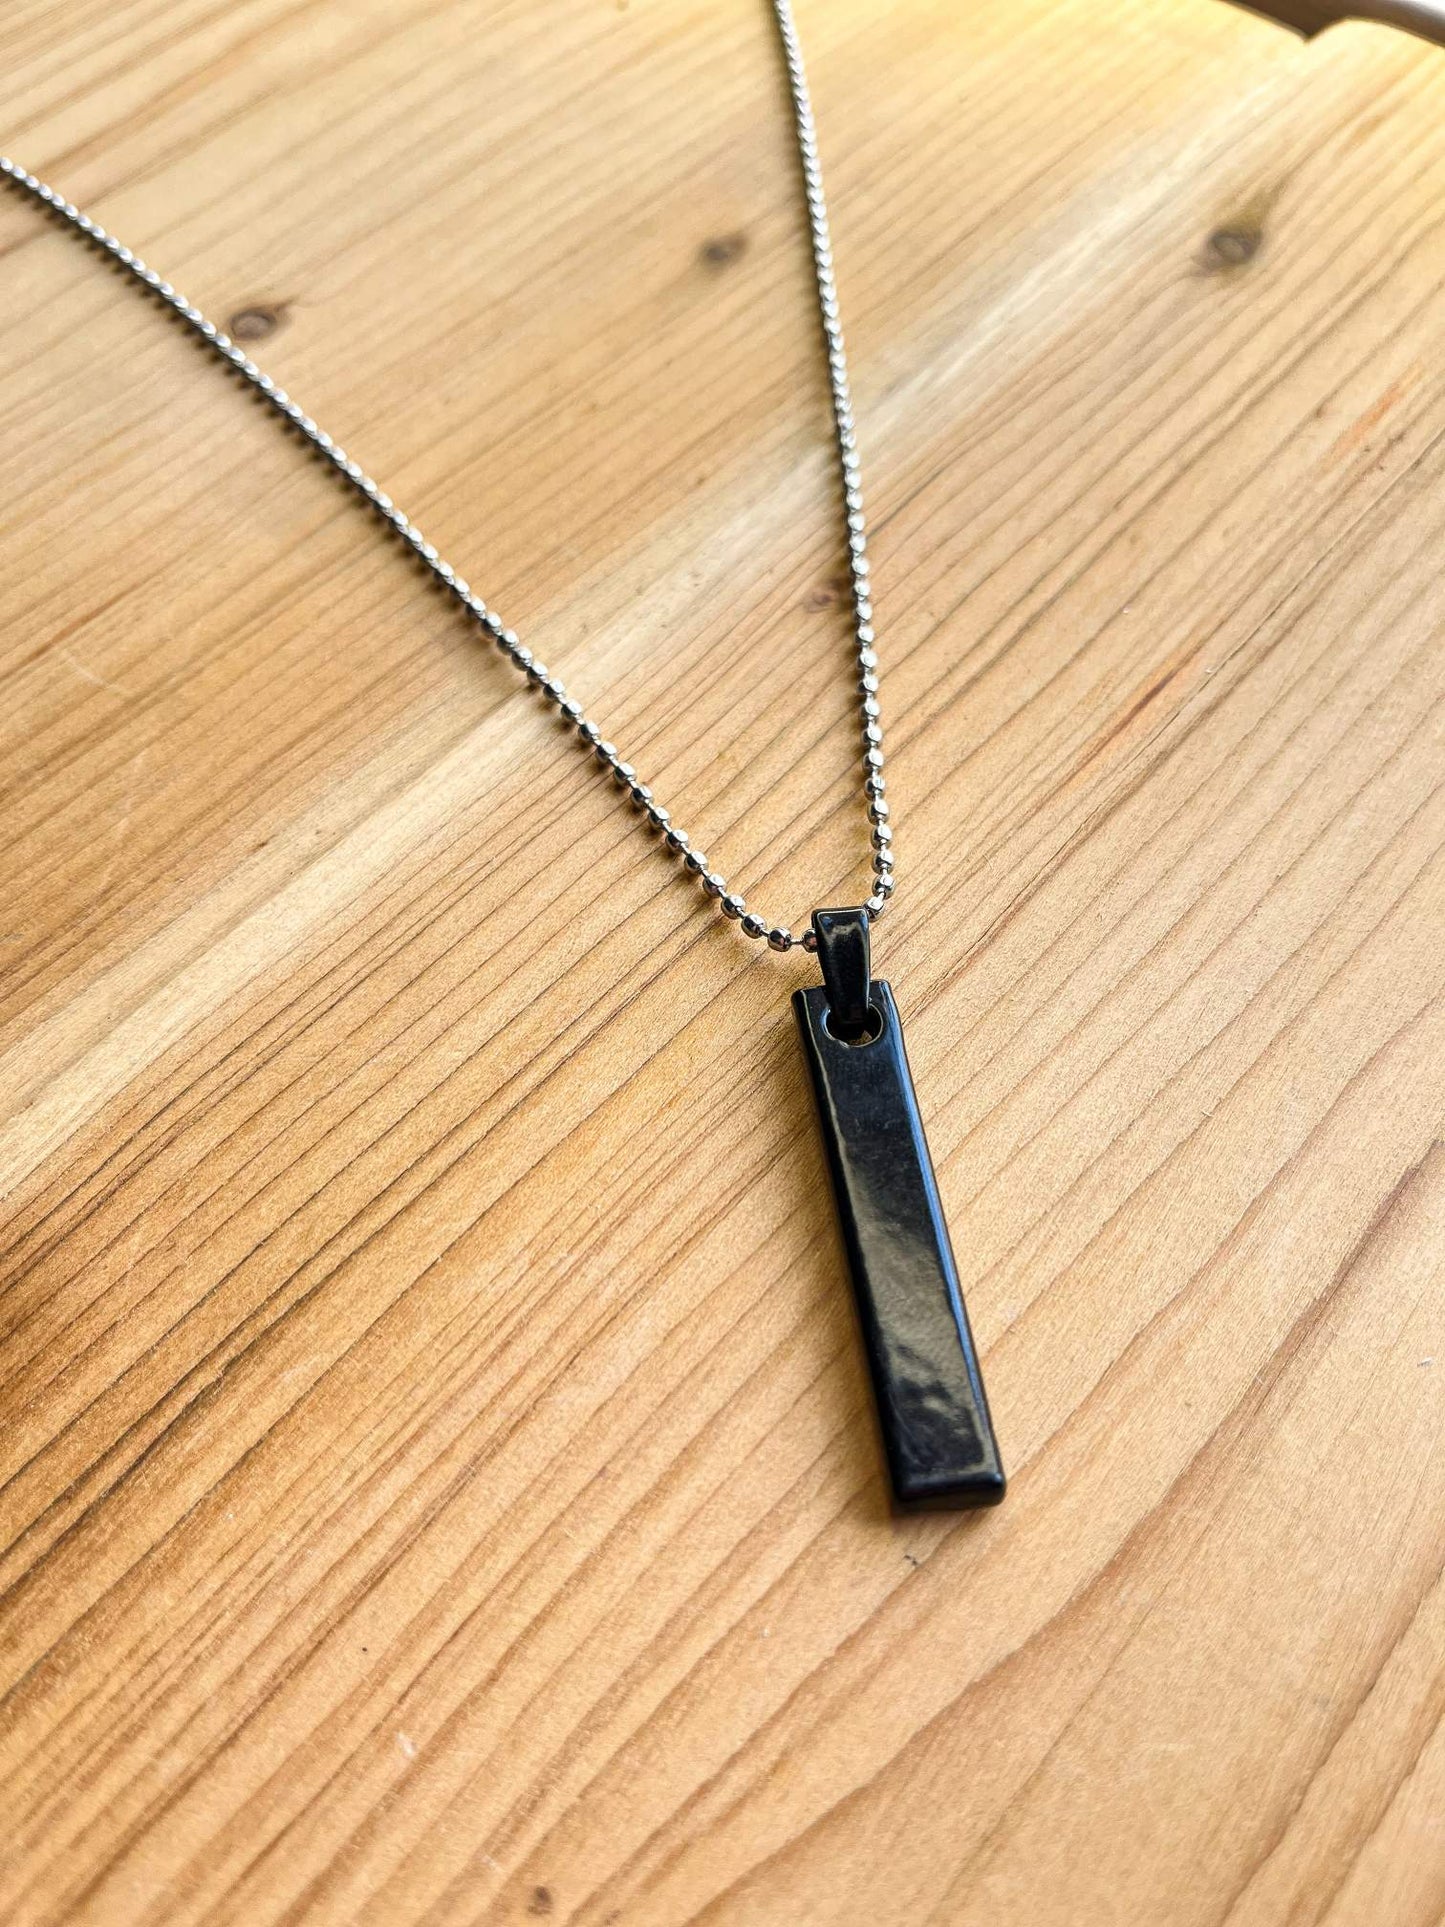 Bar Pendant With Ball Chain For Men: Silver With Black